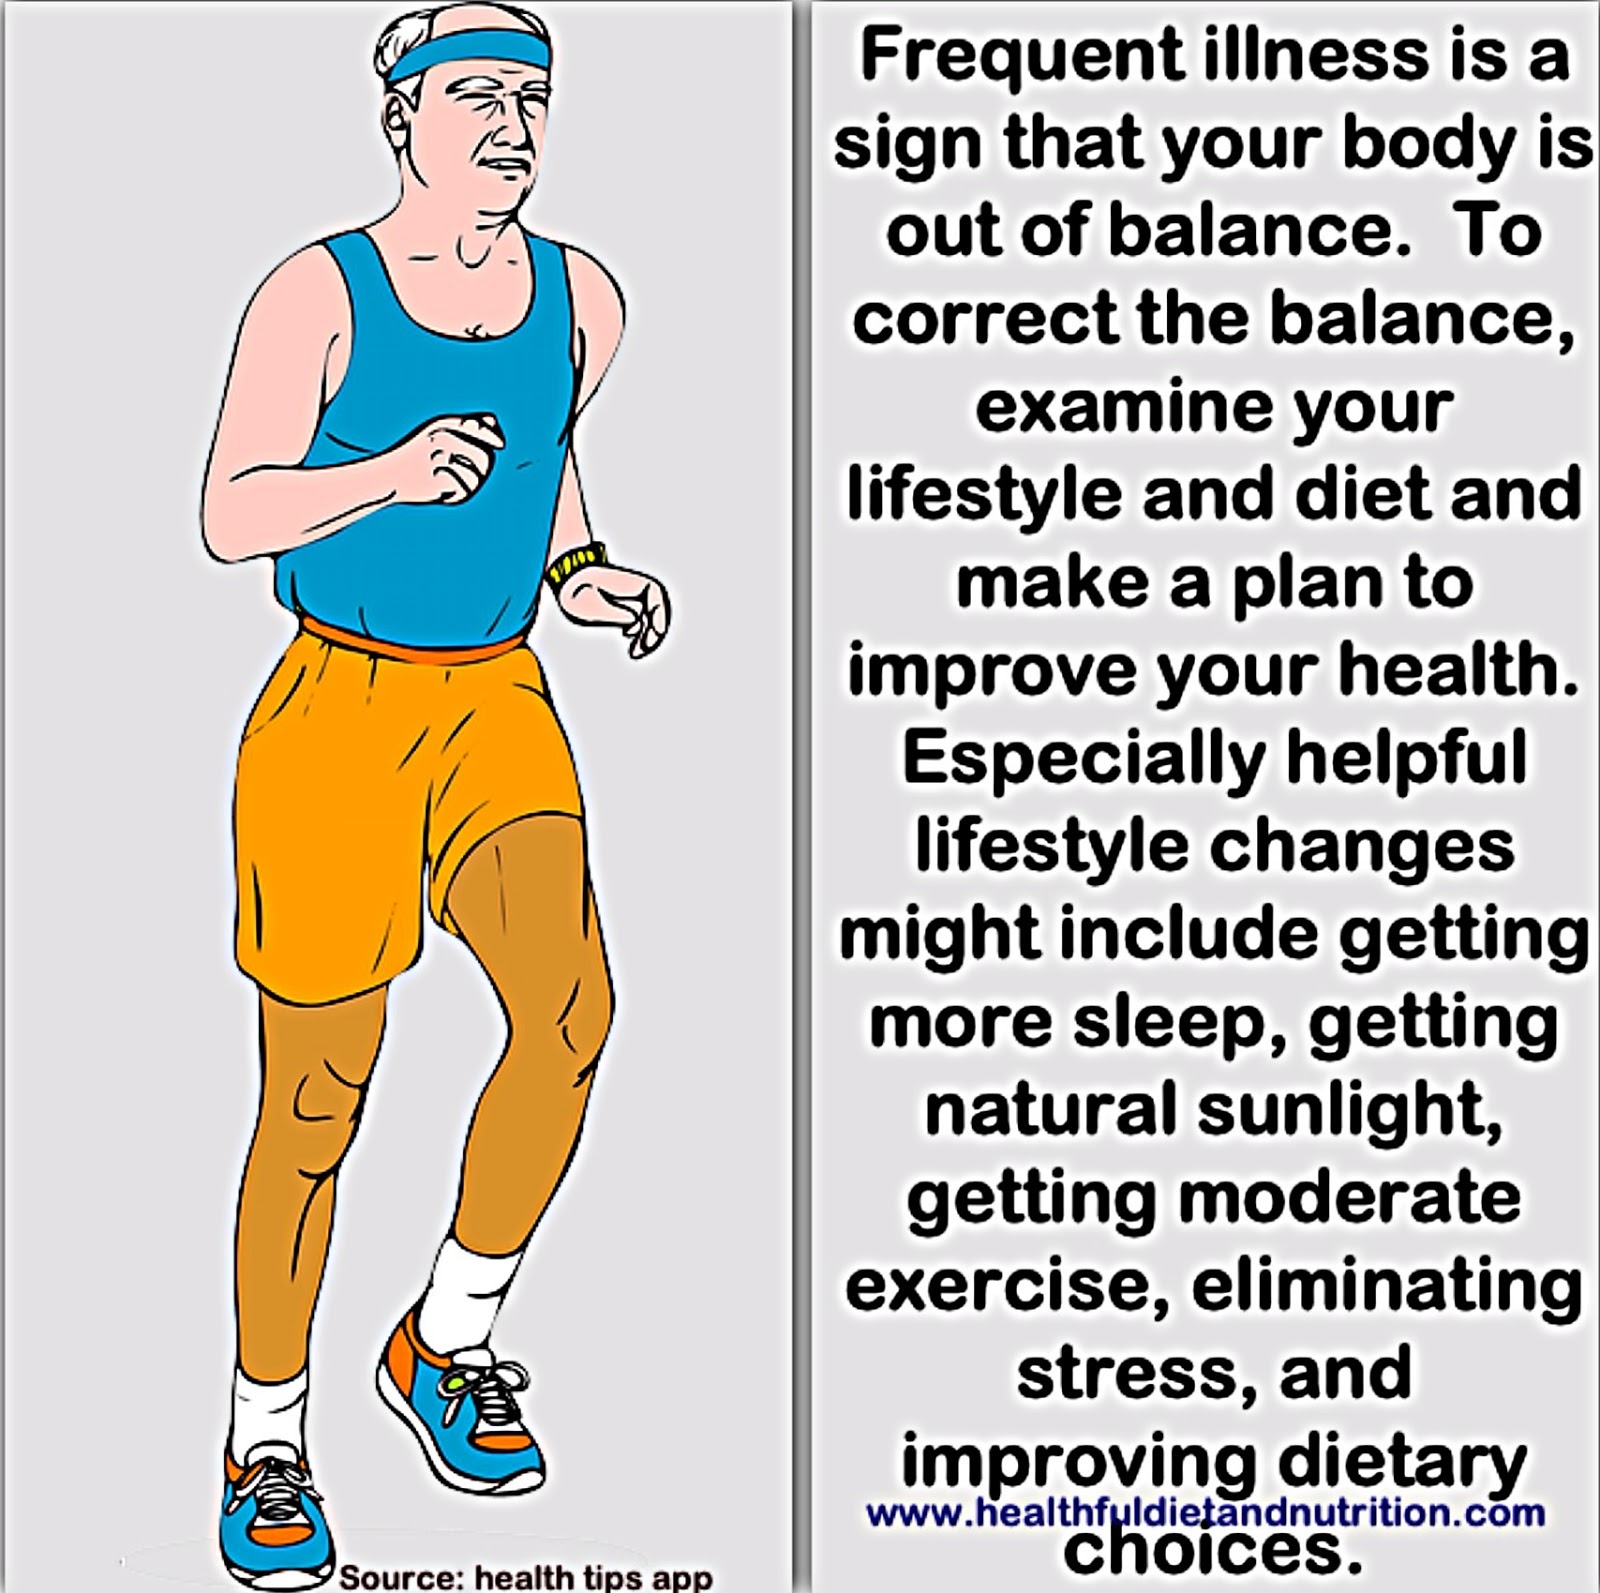 Examine Your Lifestyle & Diet To Prevent Frequent Illness